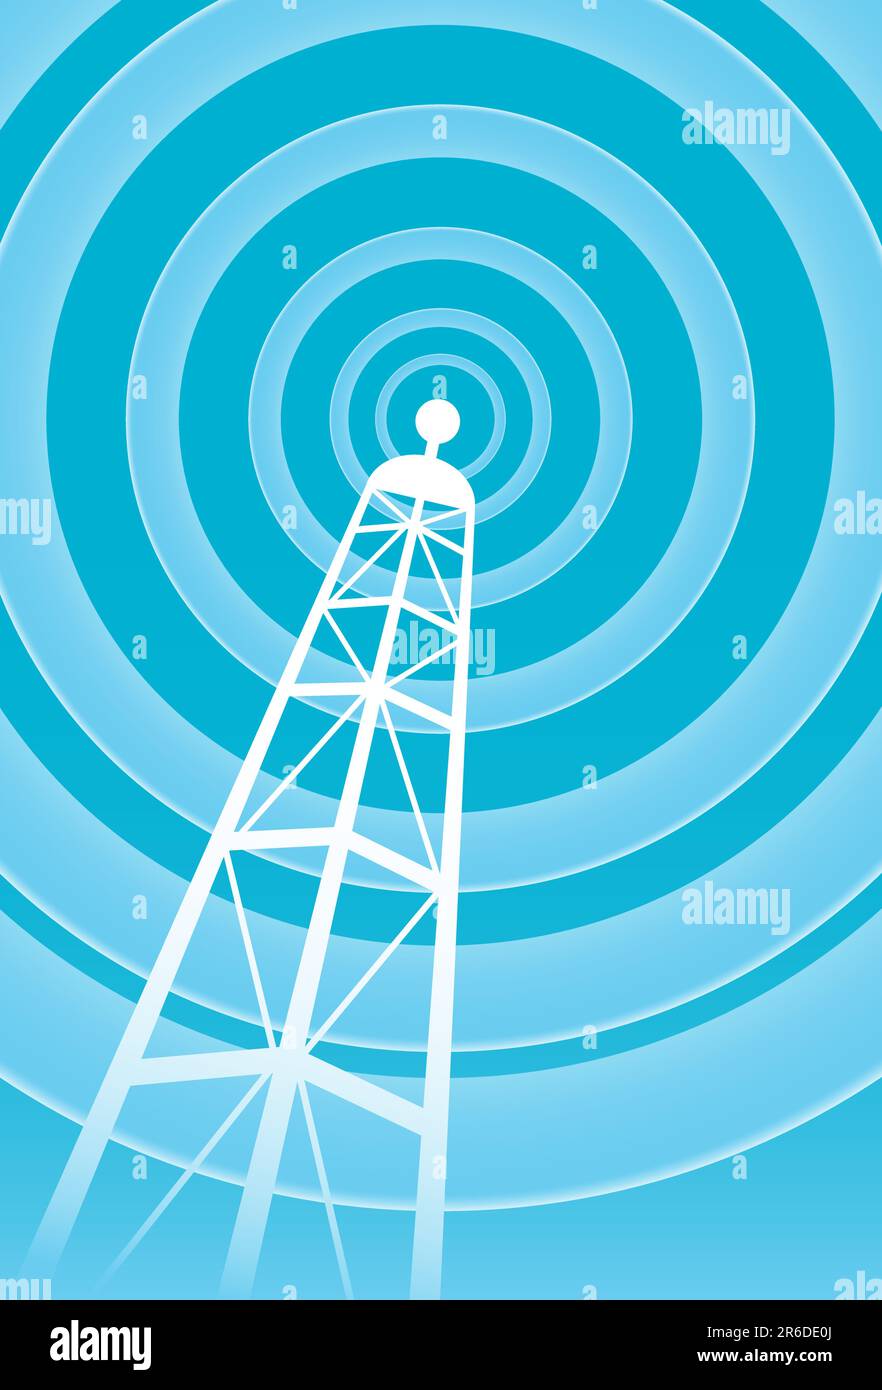 Image of a communications tower with blue background. Stock Vector